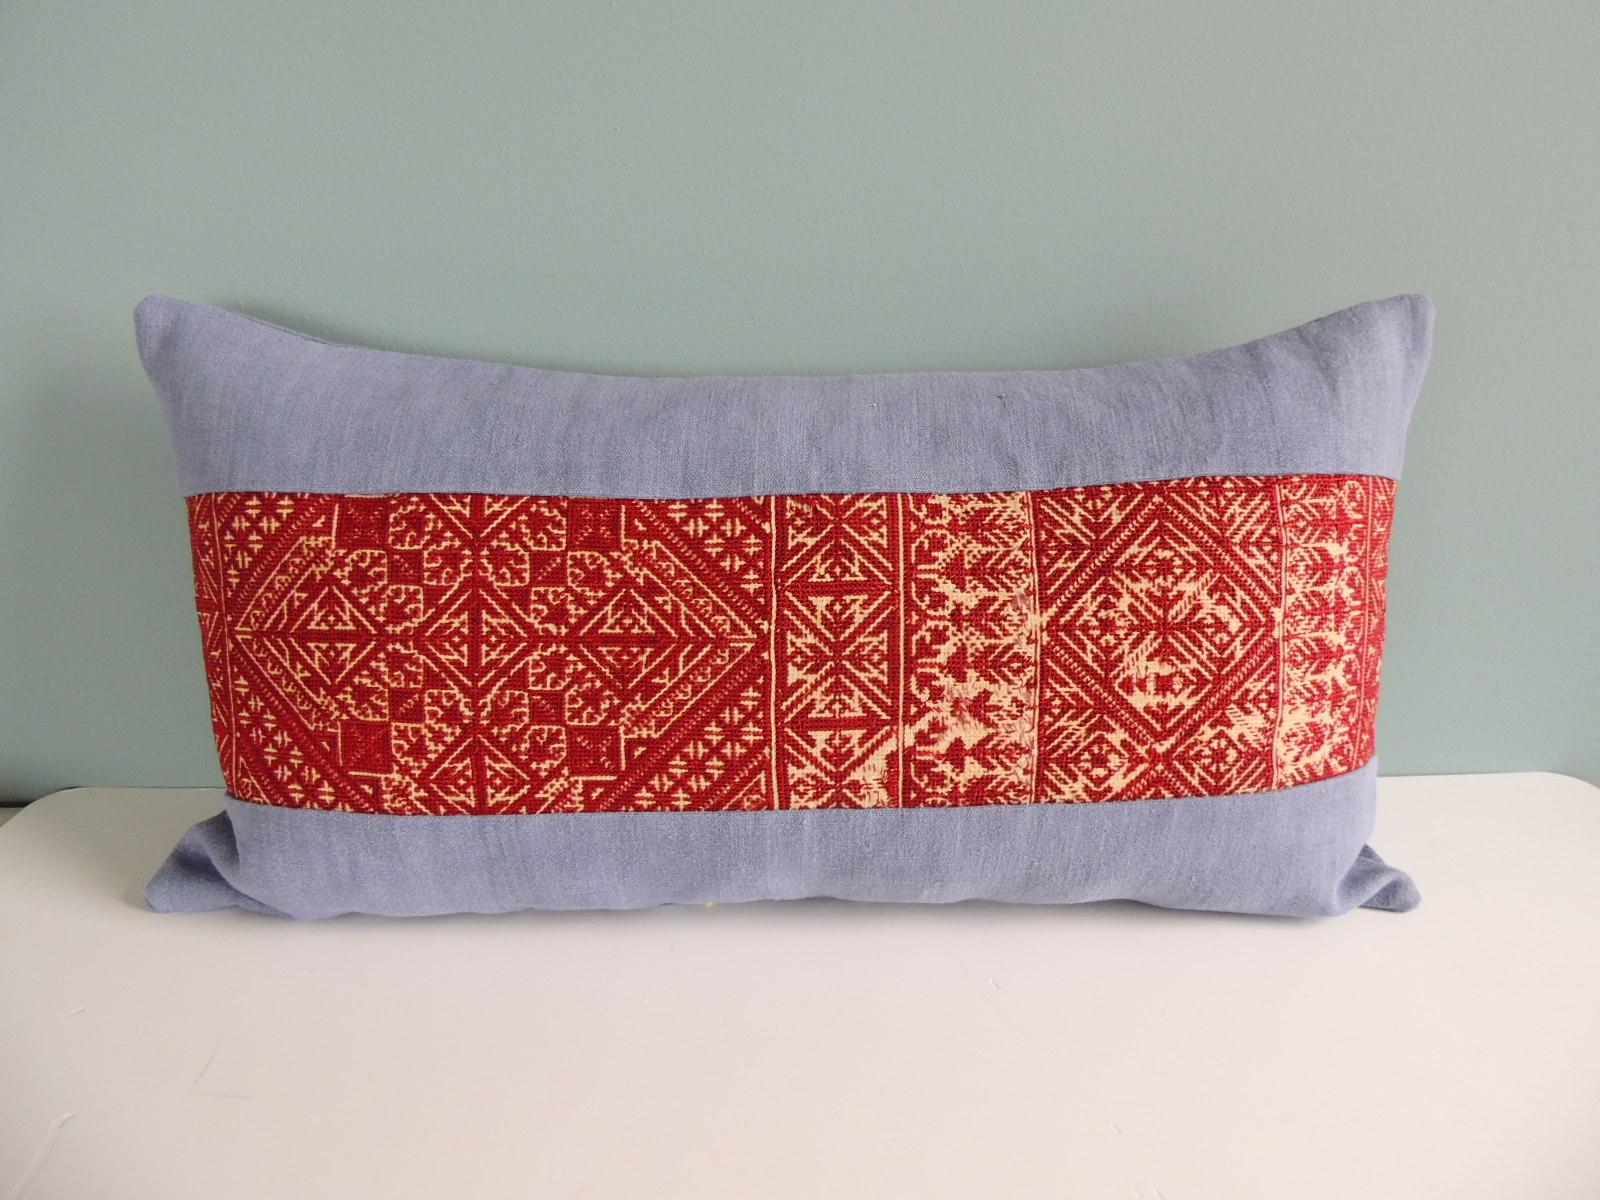 Antique burnt orange embroidered fez decorative long bolster pillow with blue linen frame
and same backing.
Decorative pillow handcrafted and designed in the USA. 
Closure by stitch (no zipper closure) with custom-made feather/ down pillow